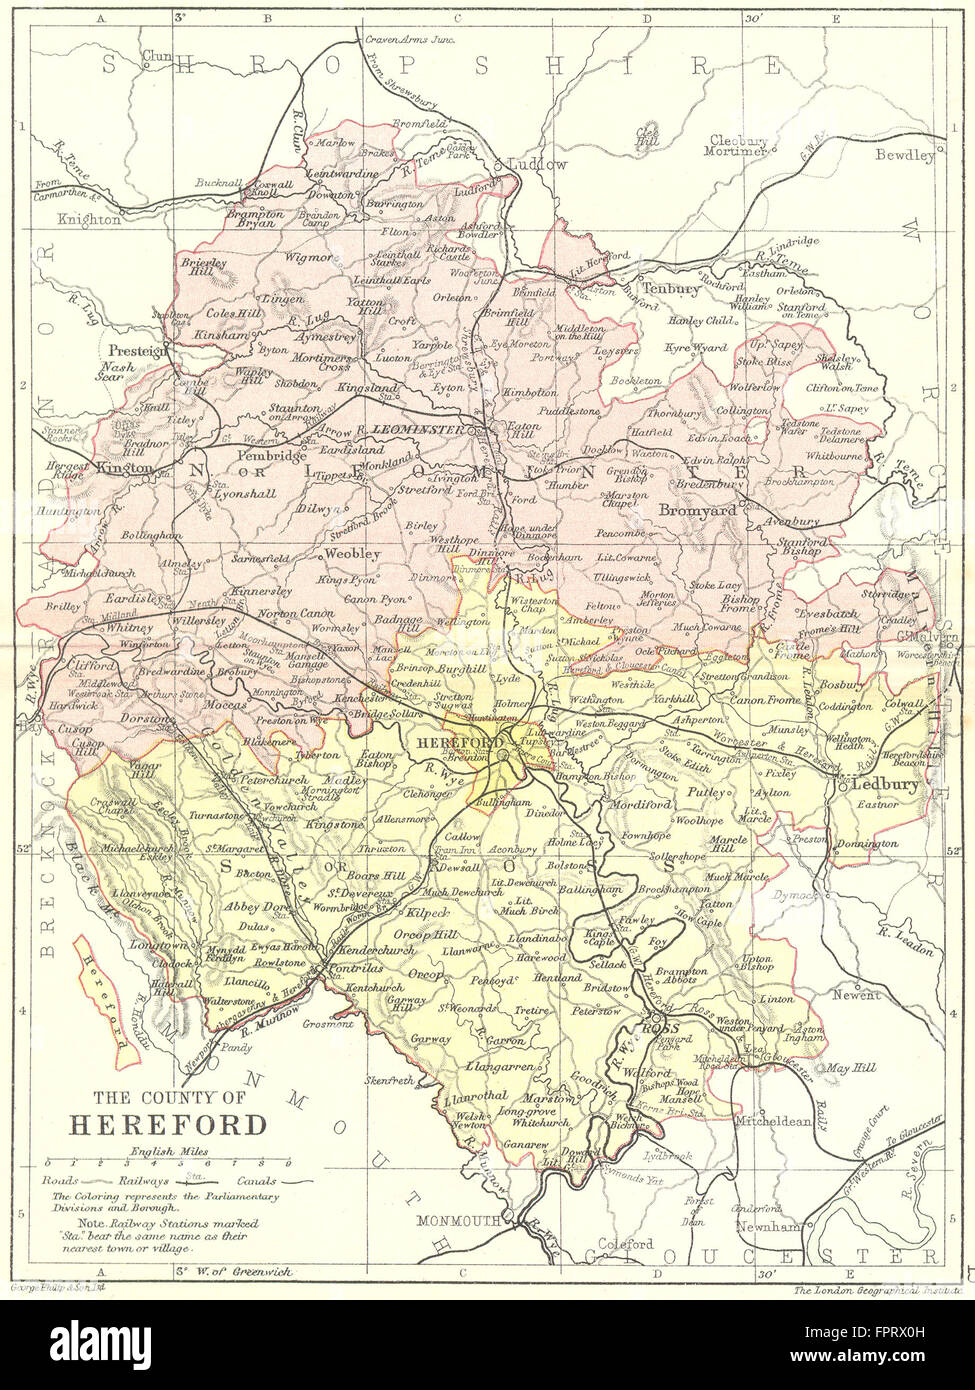 HEREFORD: Philip, 1890 antique map Stock Photo